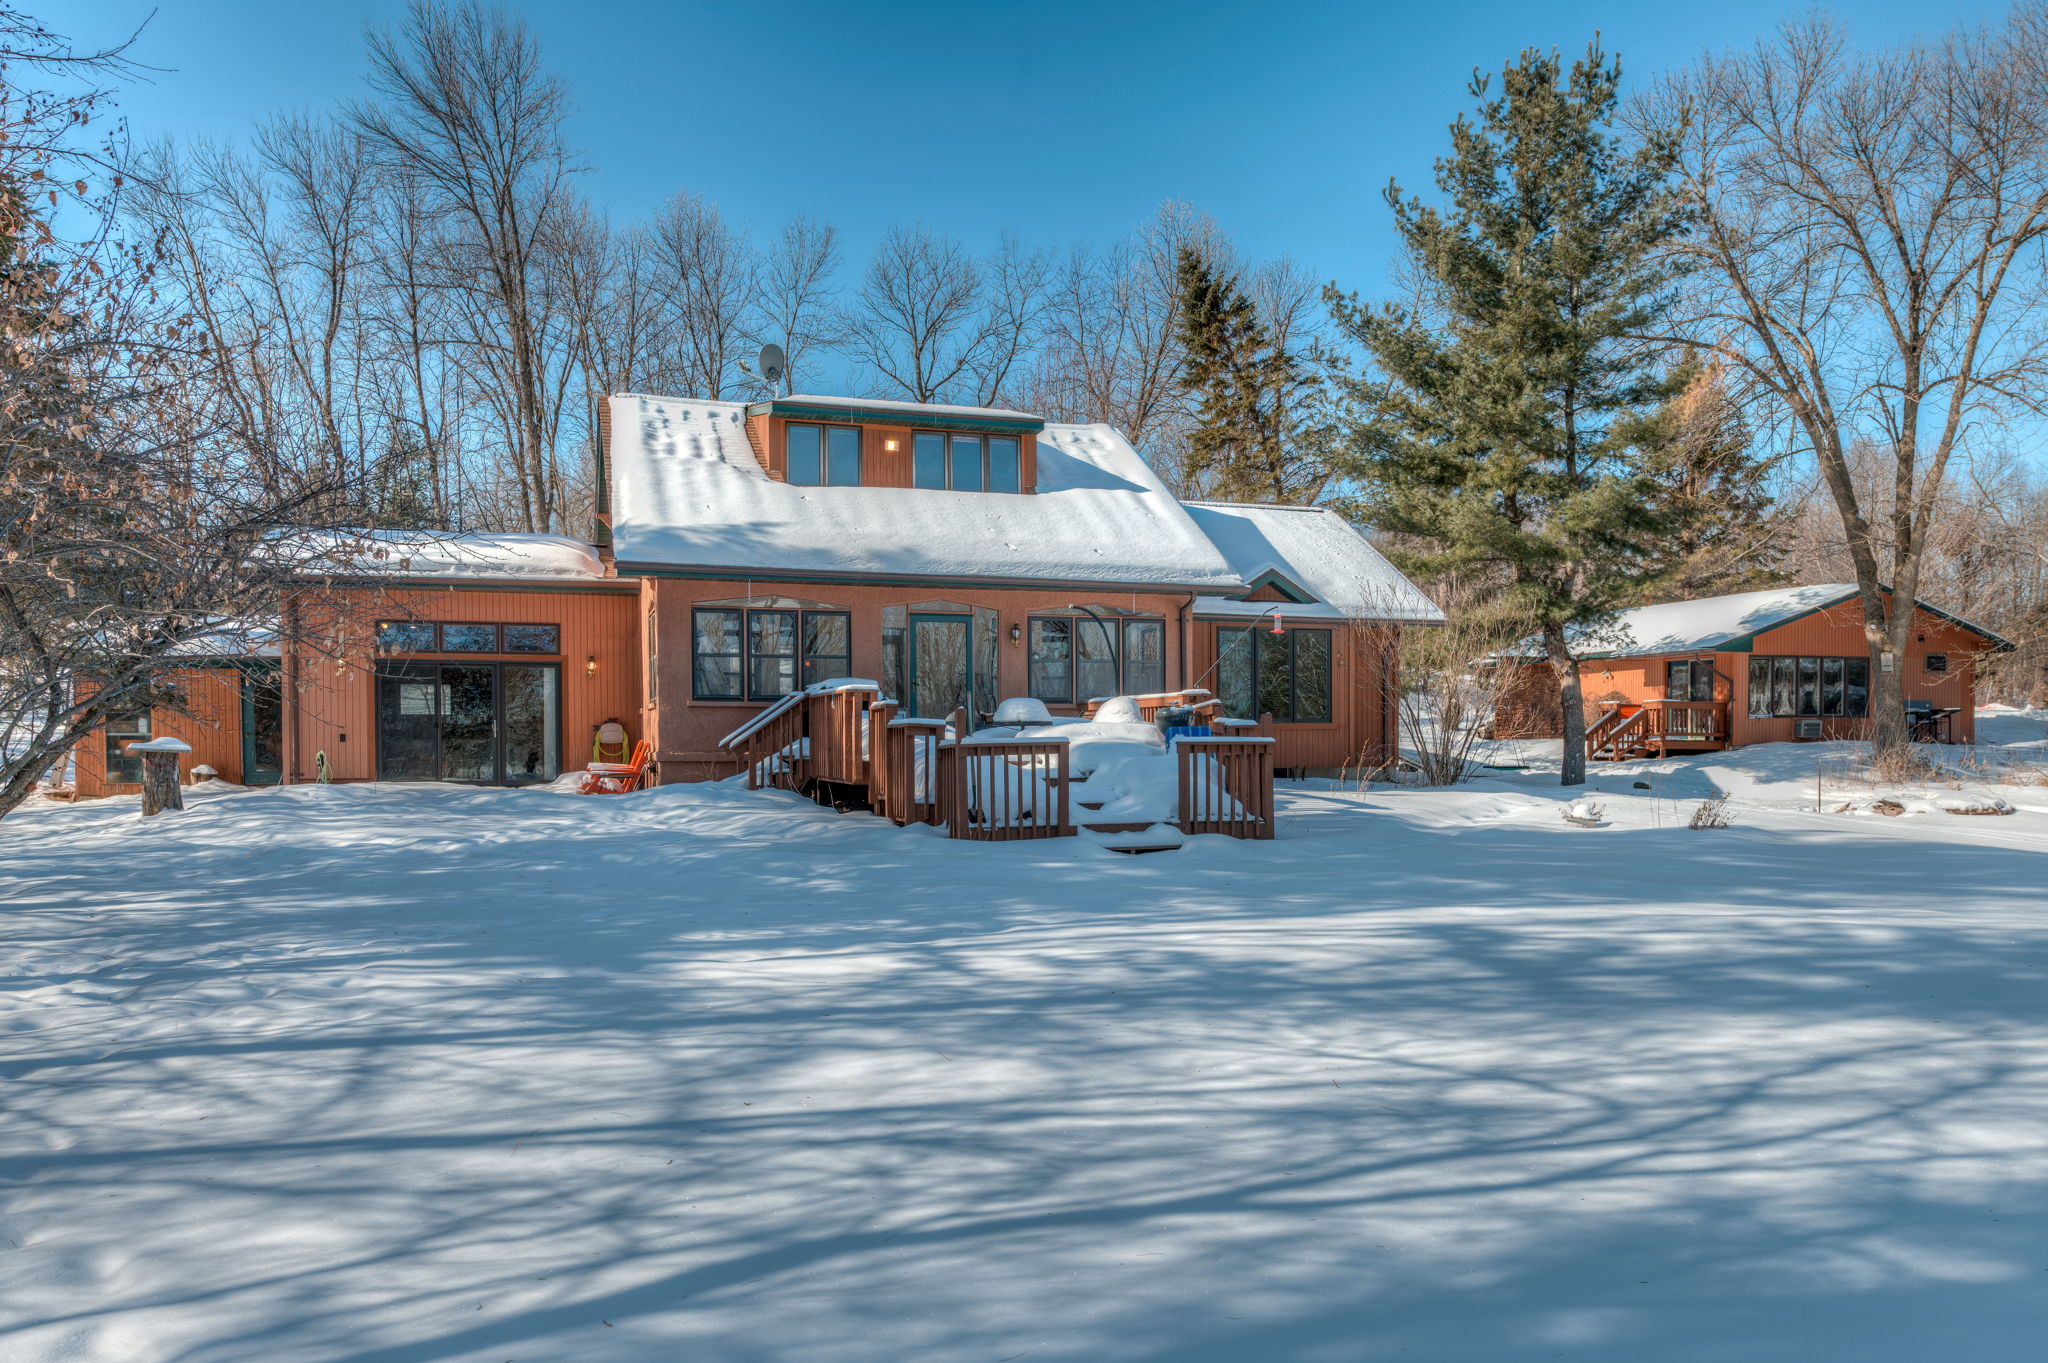  11646 W Round Lake Rd, Luck, WI 54853, US